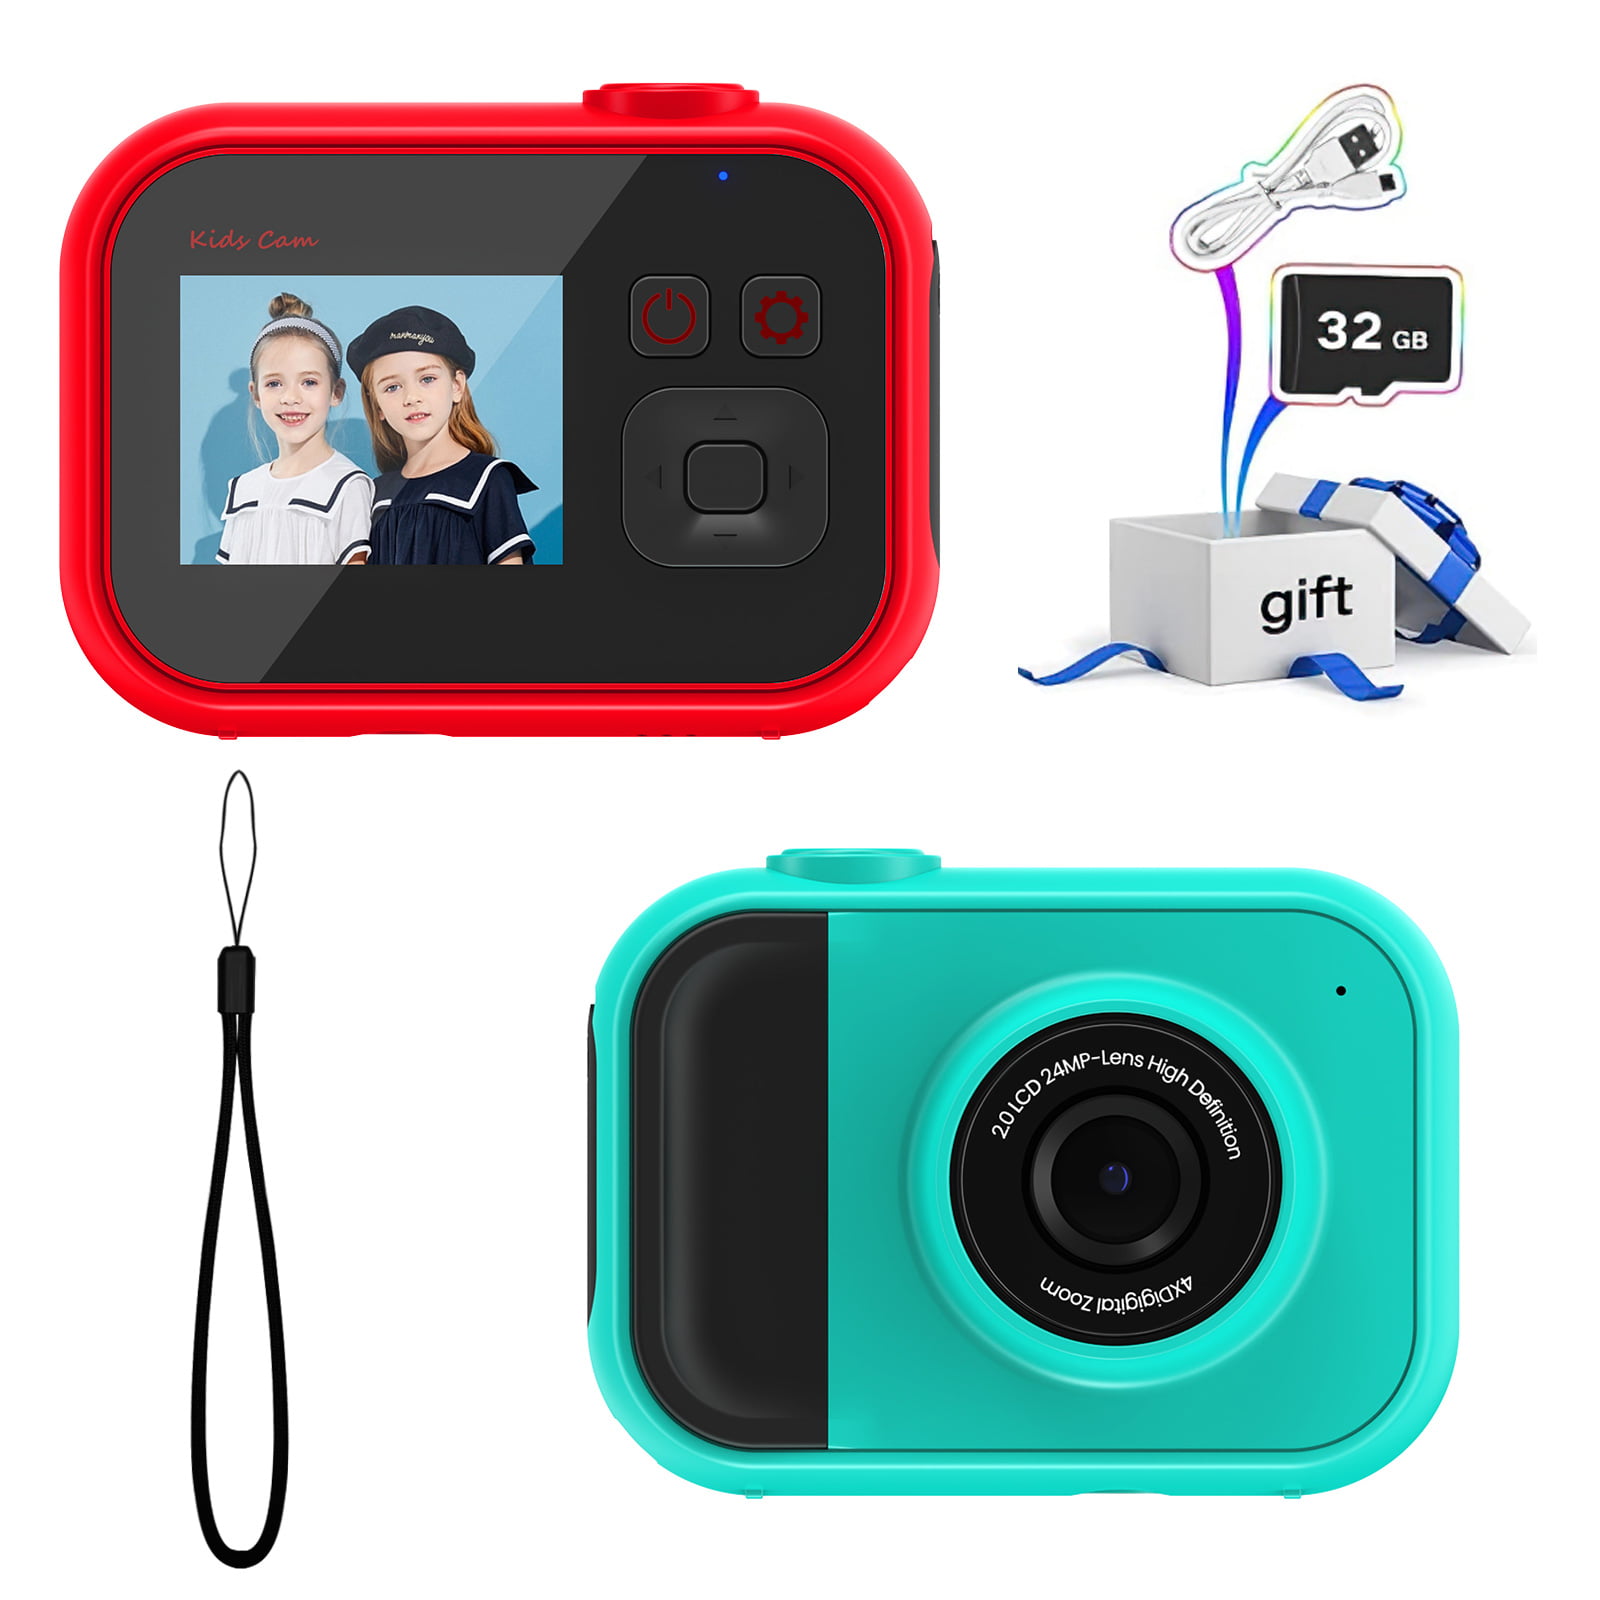 Toy Camera Kids Mini Digital Camera 2-inch LCD Display MP3 MP4 Games Best Entertainment Gift for Kids Ages 3-12 Outdoor ZINSOKO Kids Waterproof Camera Peach 